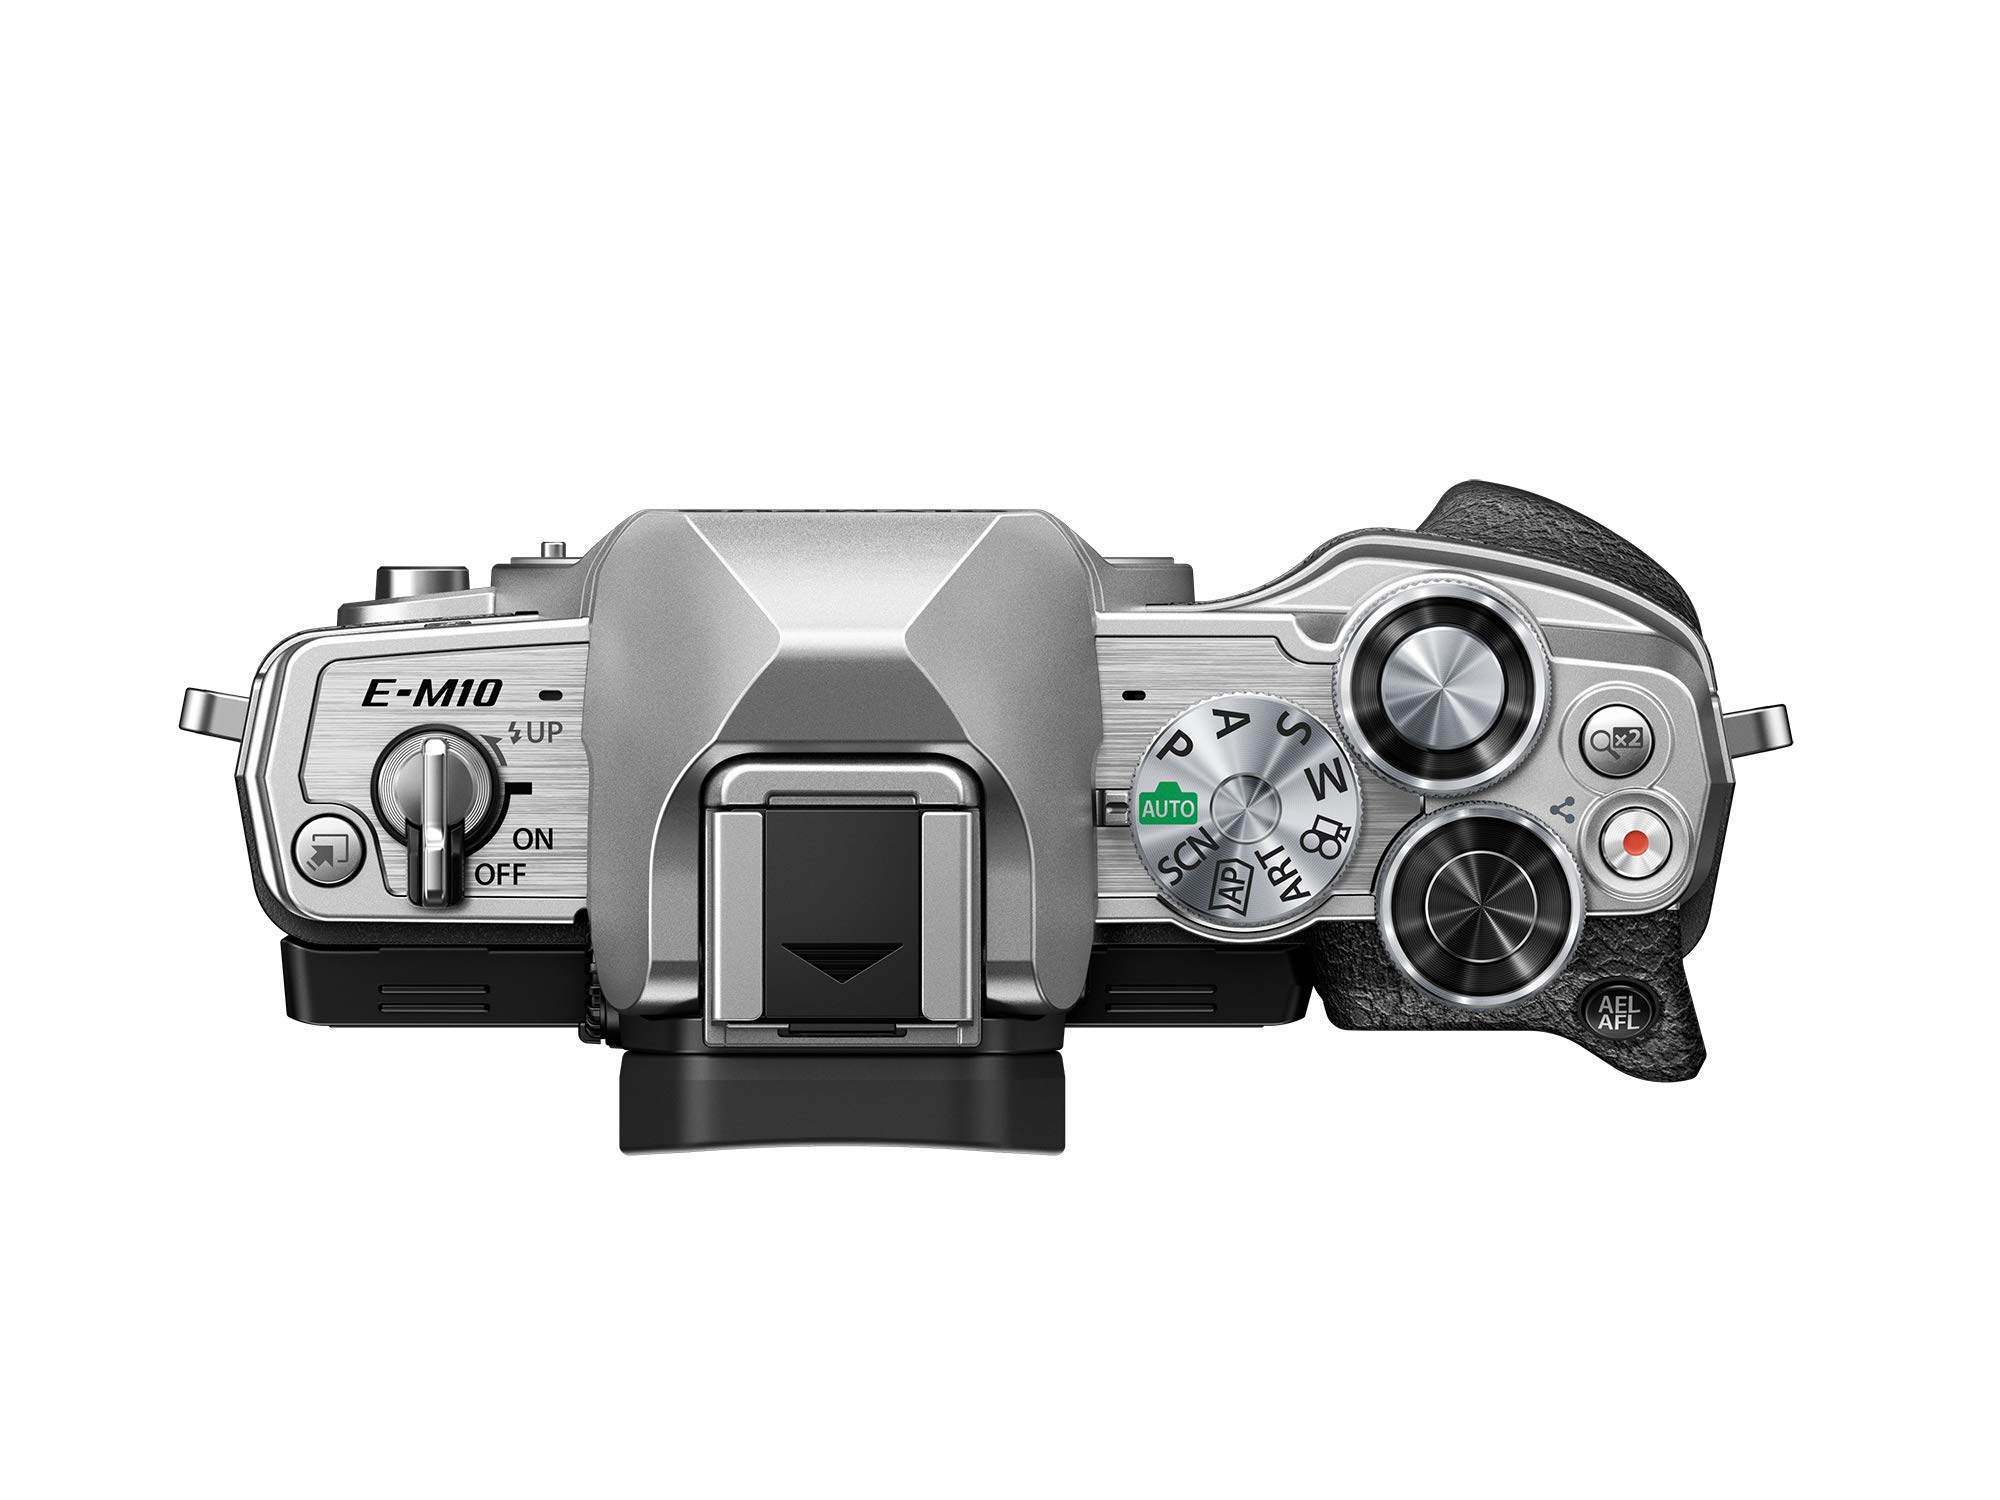 OLYMPUS E-M10 Mark IV Silver Micro Four Thirds System Camera 20MP Sensor 5-Axis Image Stabilization 4K Video Wi-Fi